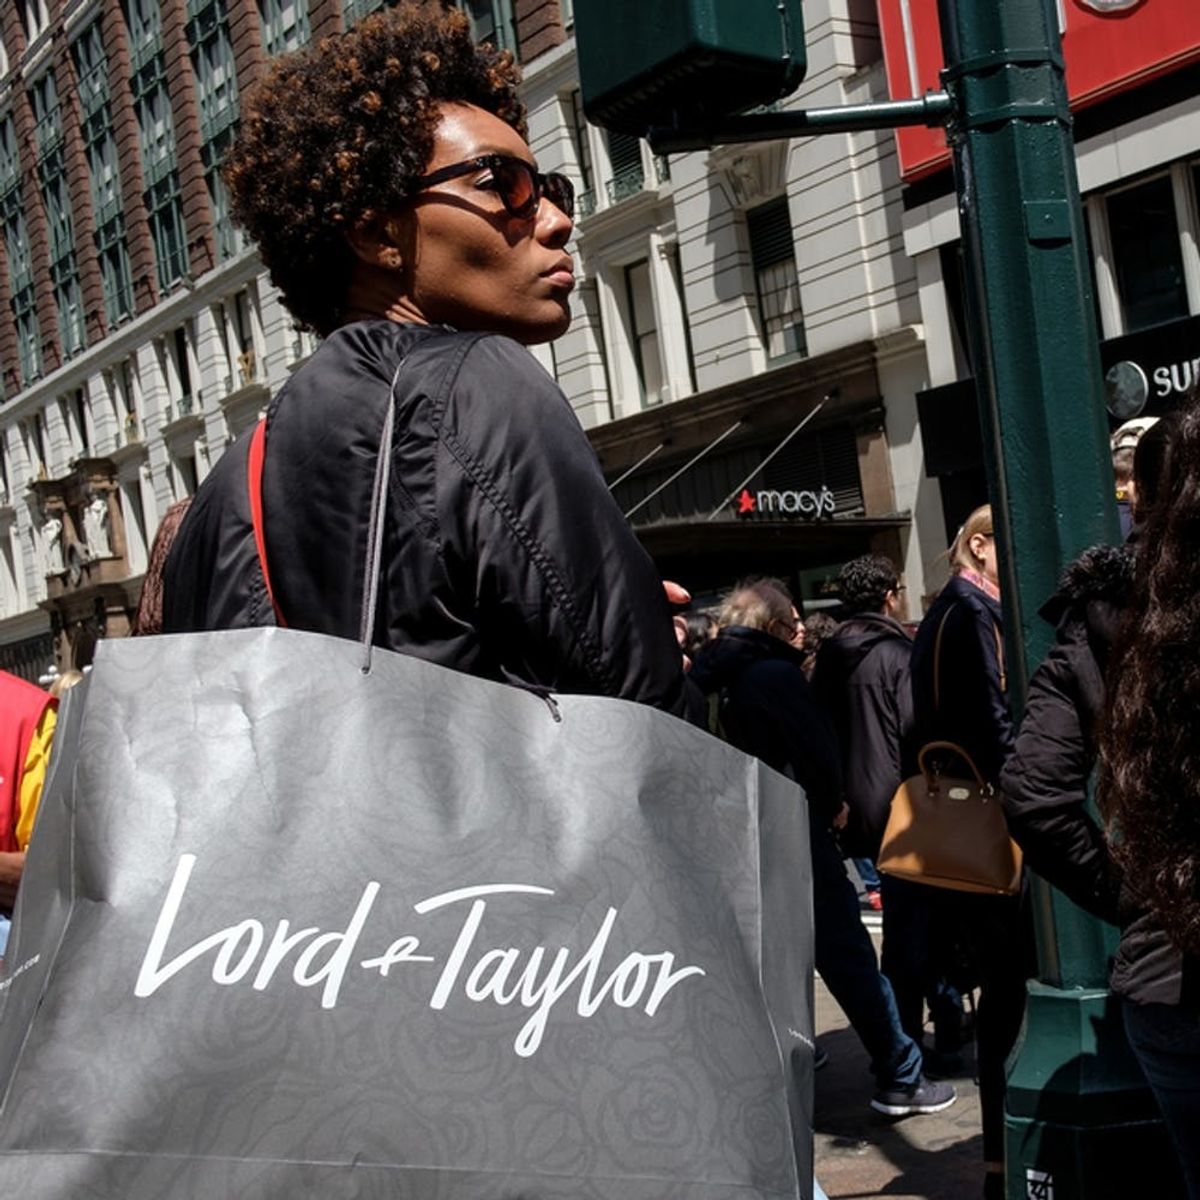 Lord & Taylor Is About to Make Bargain Hunters Very Happy With Its New Price-Matching Policy